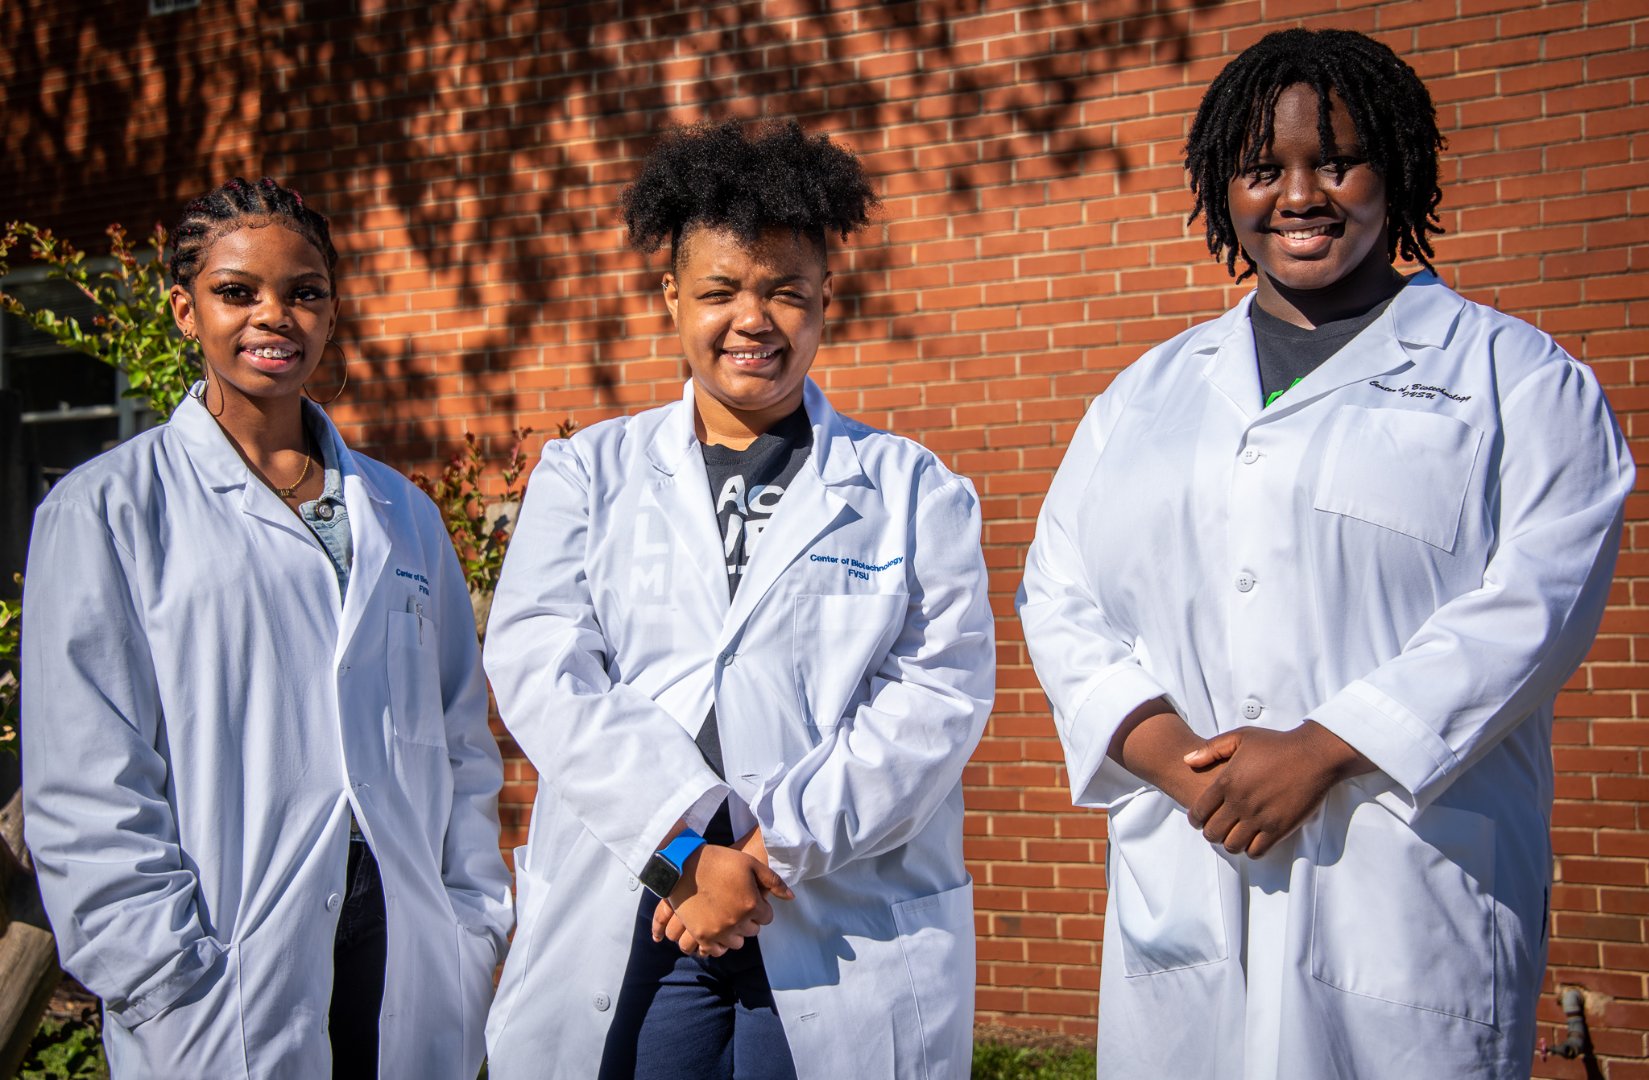 Fort Valley State University students Gabrielle Hayward, Tykera Moore and April Bramble gain valuable work experience this summer.